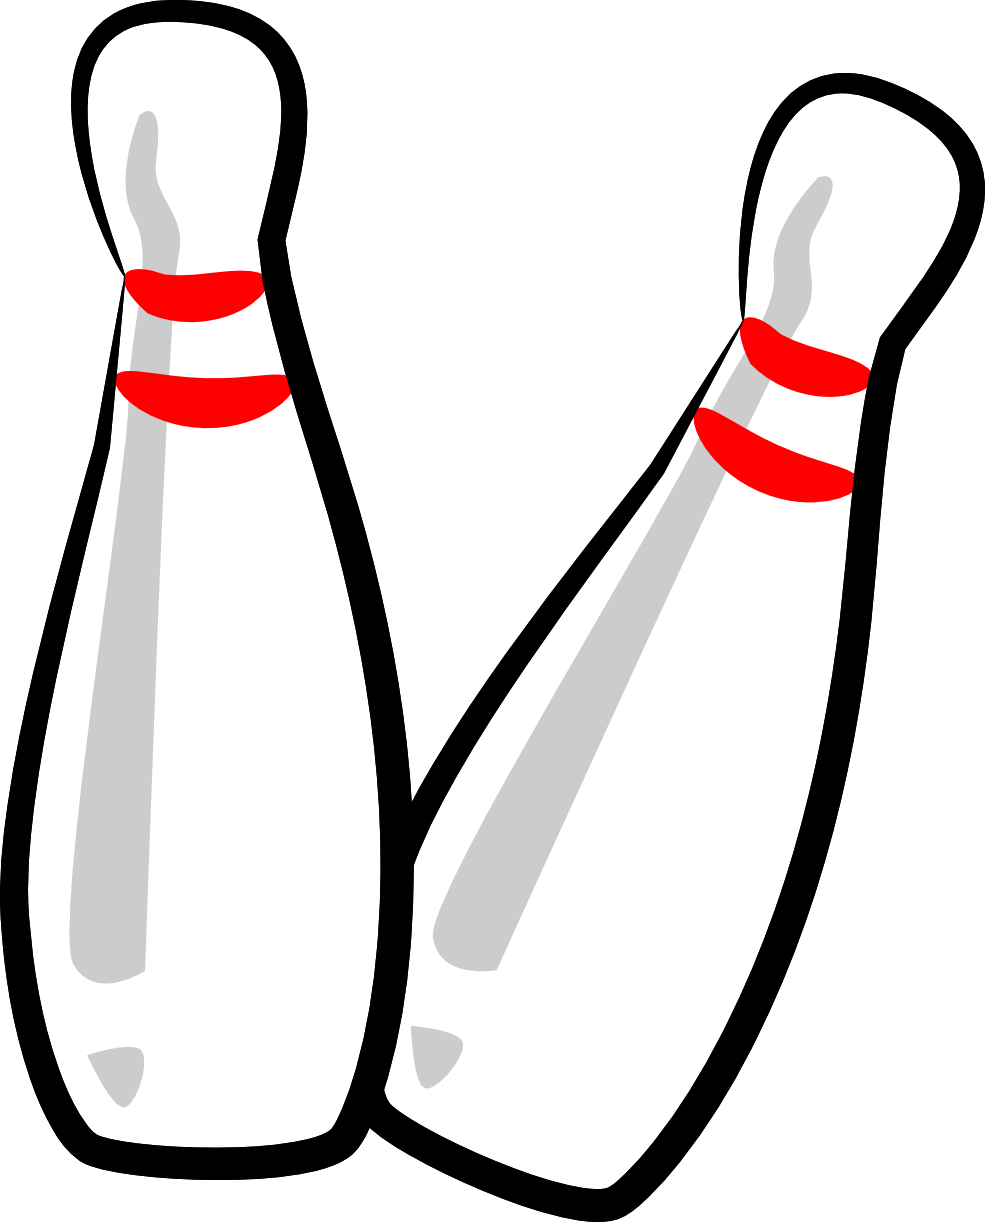 Bowling Pin Images Clipart Best